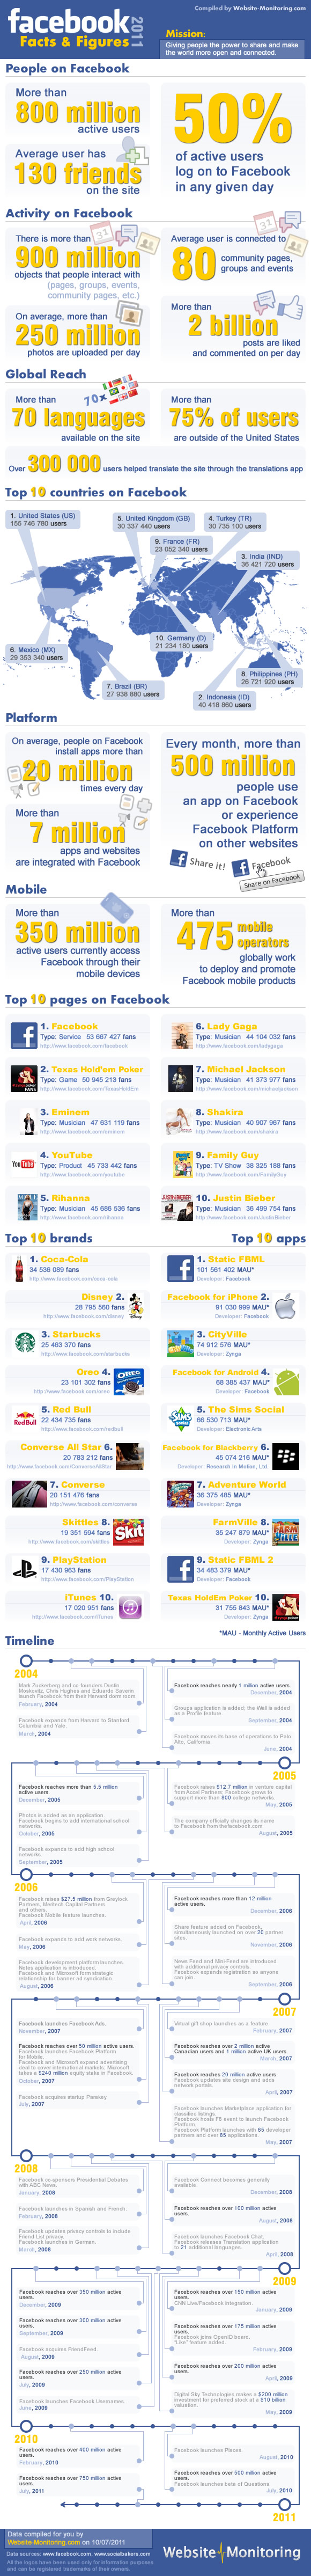 Facebook Facts and Figures 2011 (infographic)